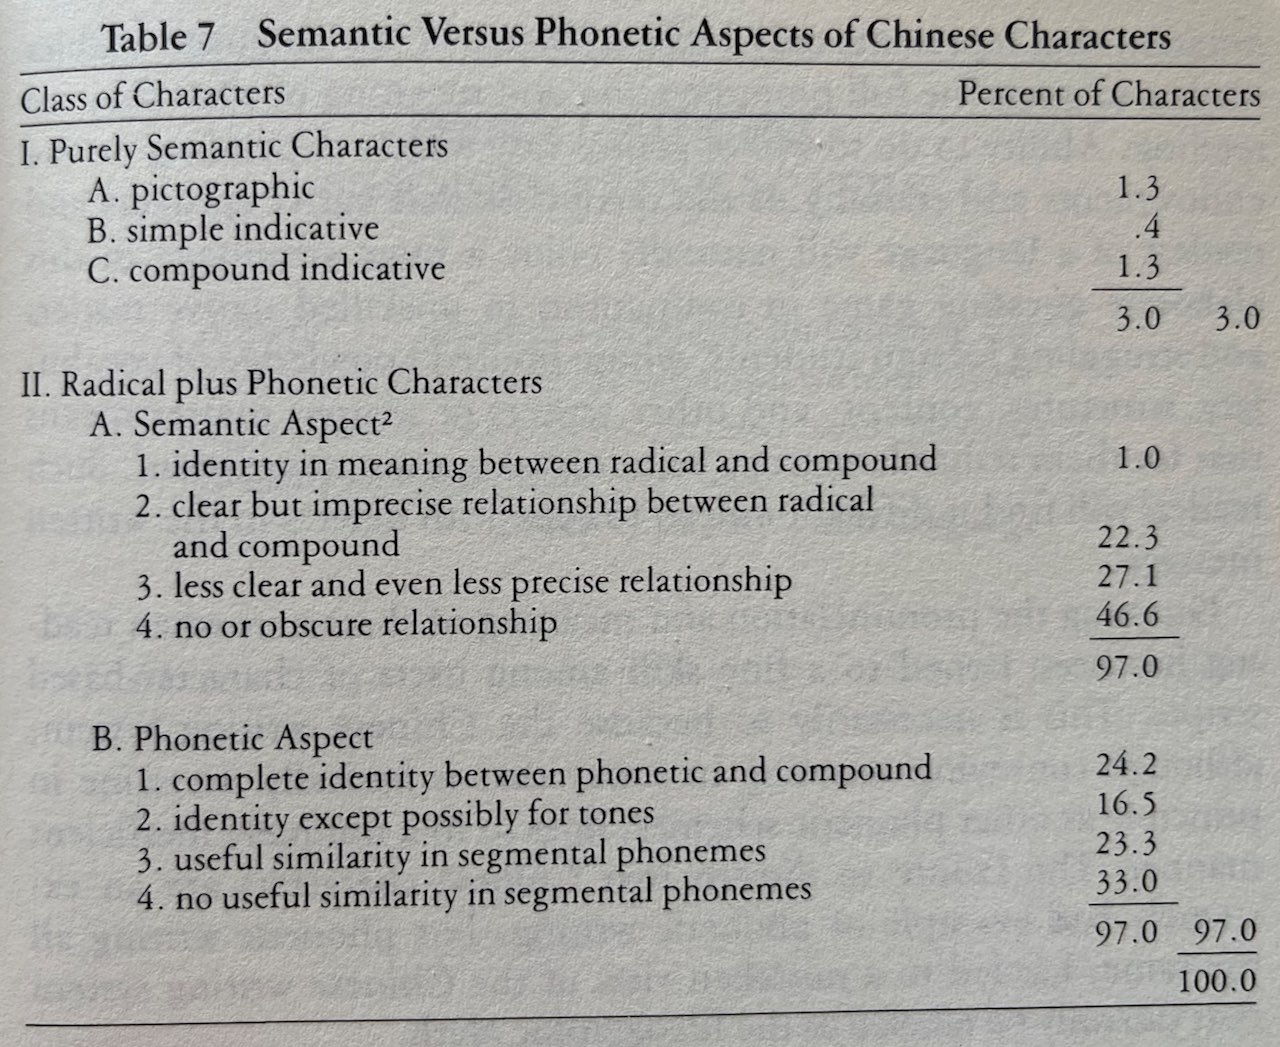 Table 7 Semantic Versus Phonetic Aspects of Chinese Characters, p. 129, _The Chinese Language: Fact and Fantasy_